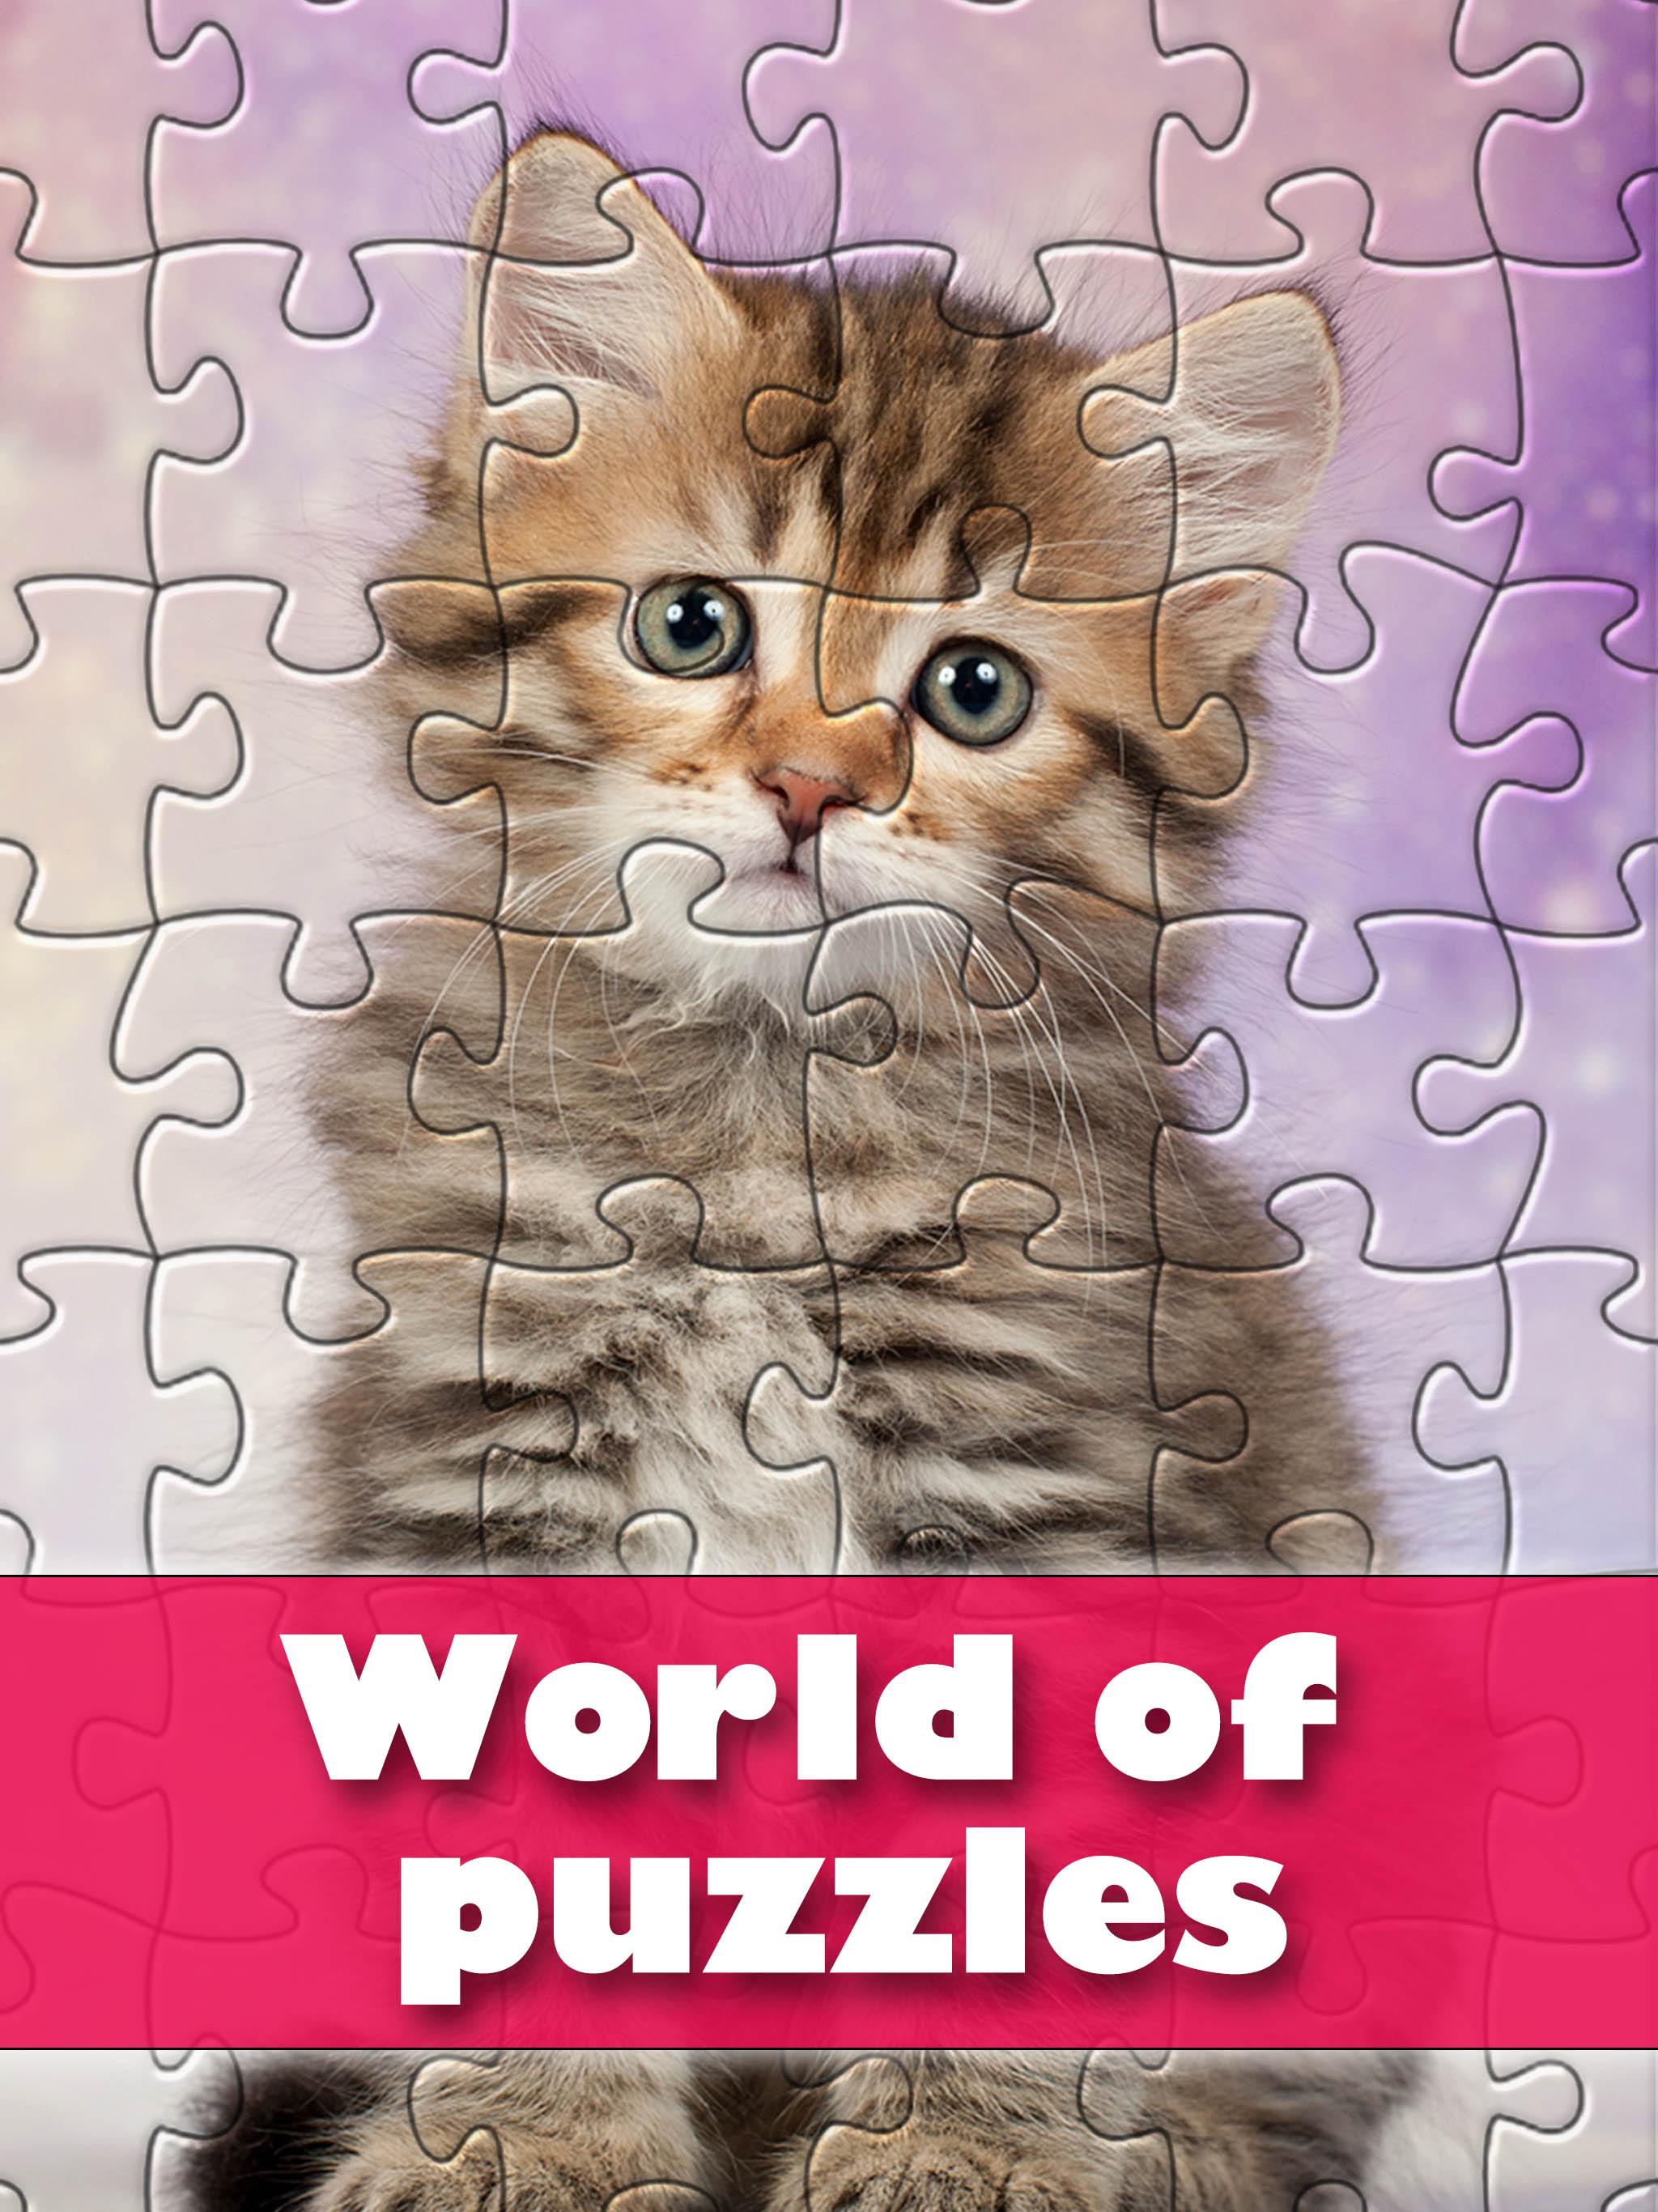 World of Puzzles - best free jigsaw puzzle games 1.16 Screenshot 9